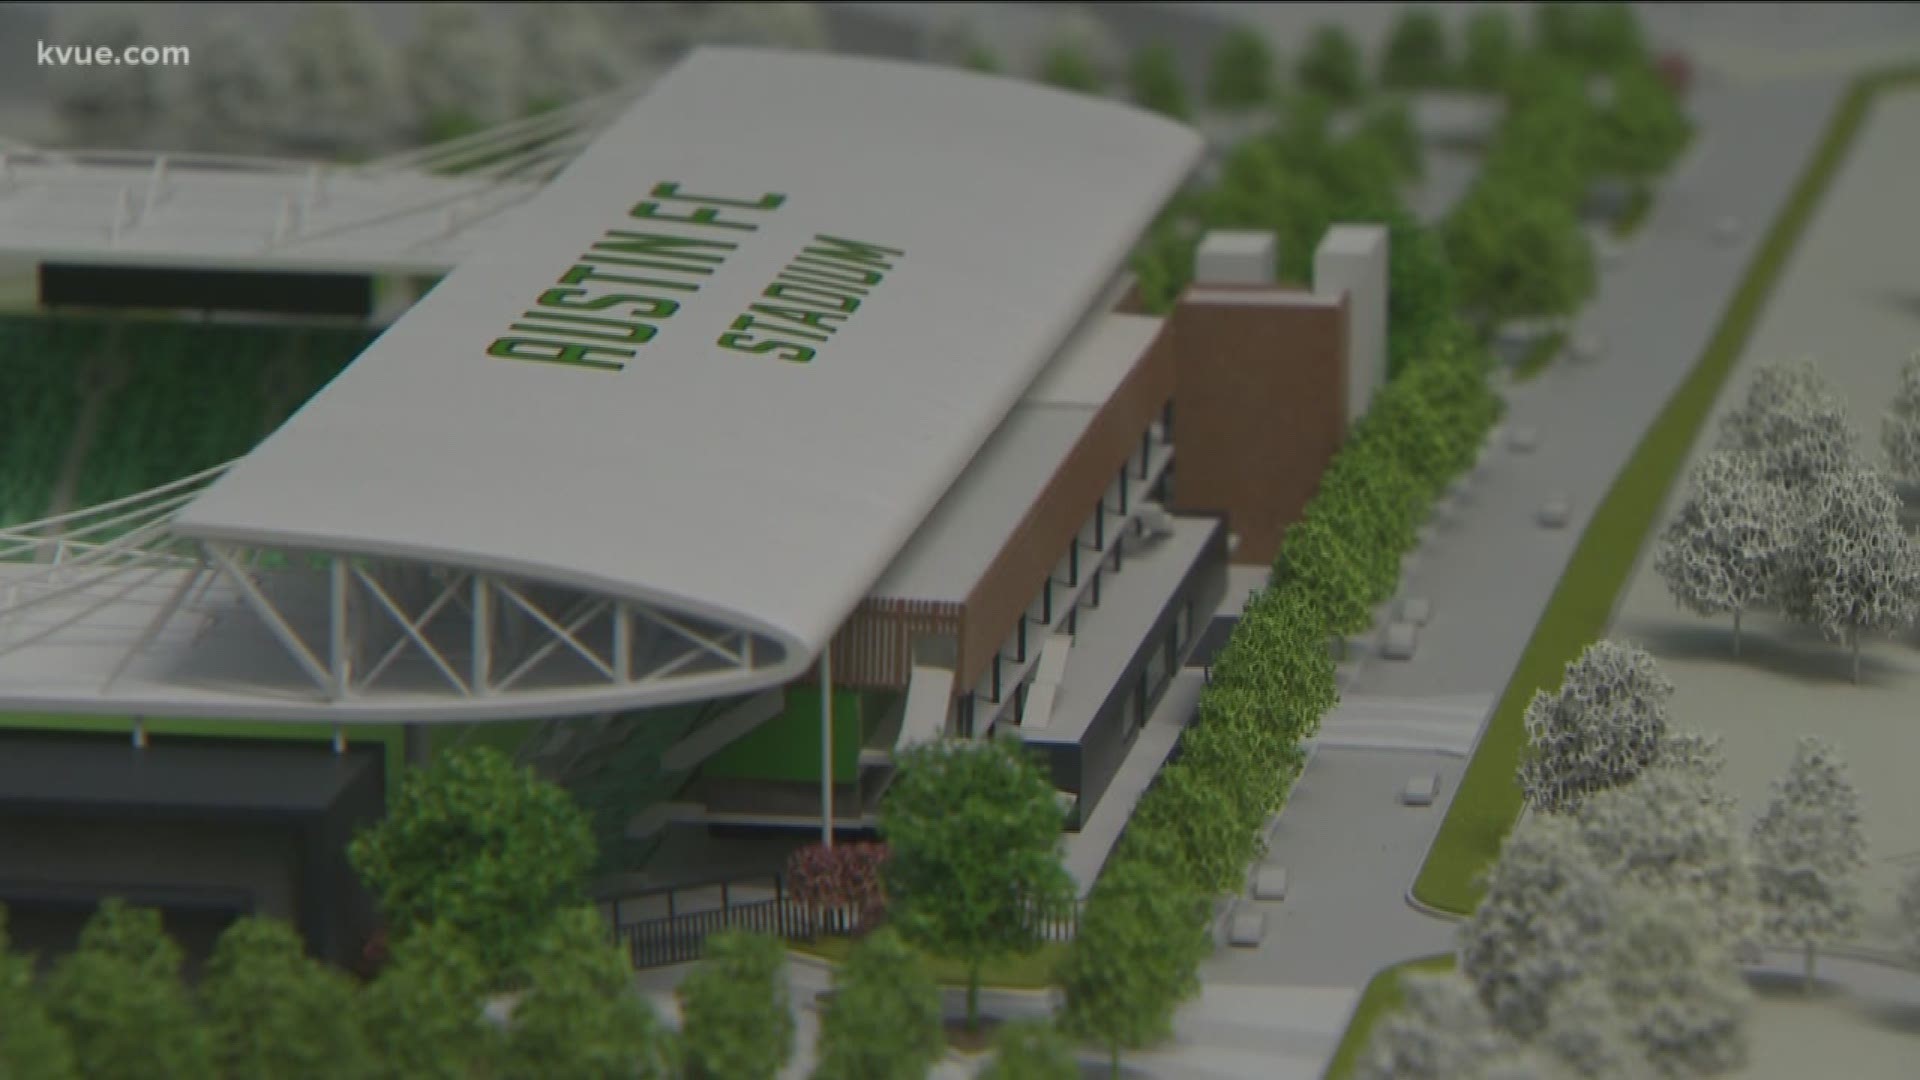 Proposition A would require the City to hold an election and let voters decide before they can use any city-owned land for a sports or entertainment stadium – like the one being built for Austin FC in North Austin.